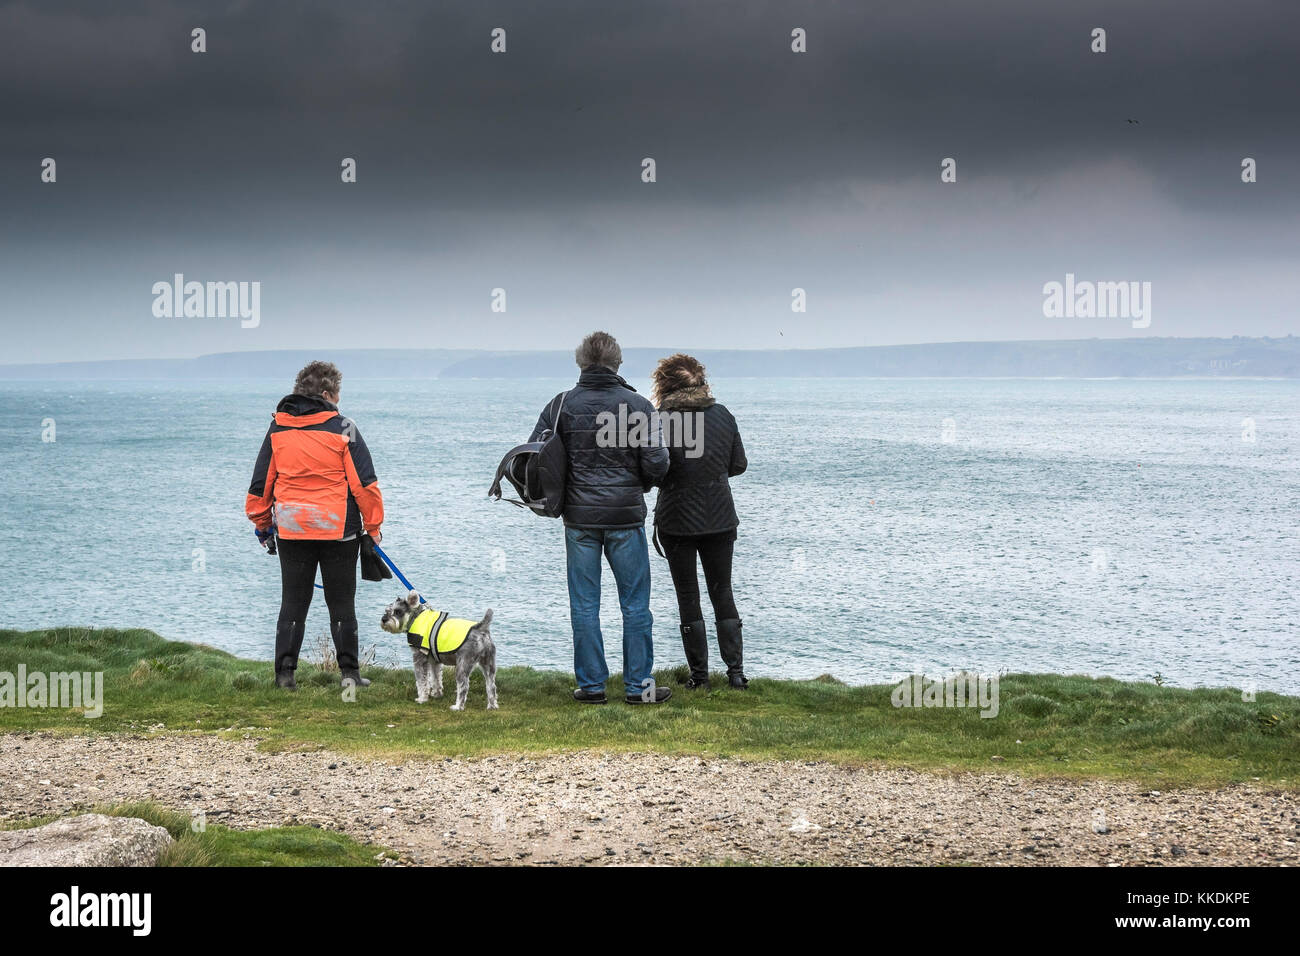 UK weather - People standing on cliffs overlooking the sea as dark rain clouds approach Newquay Cornwall UK. Stock Photo